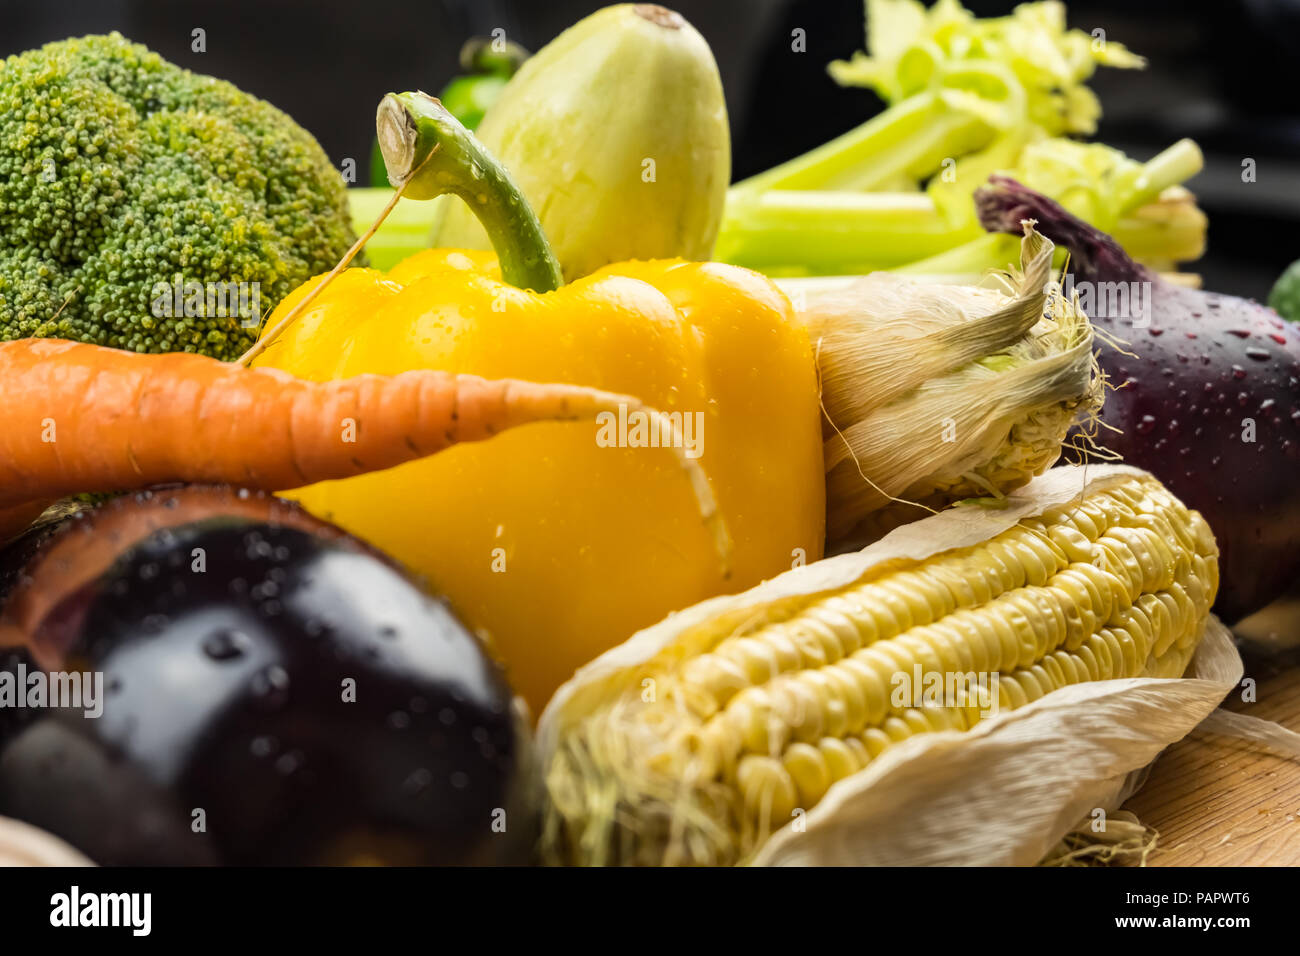 Close-up of fresh organic vegetables on rustic wood table. Locally grown bell pepper, corn and other natural vegan food laying on table Stock Photo